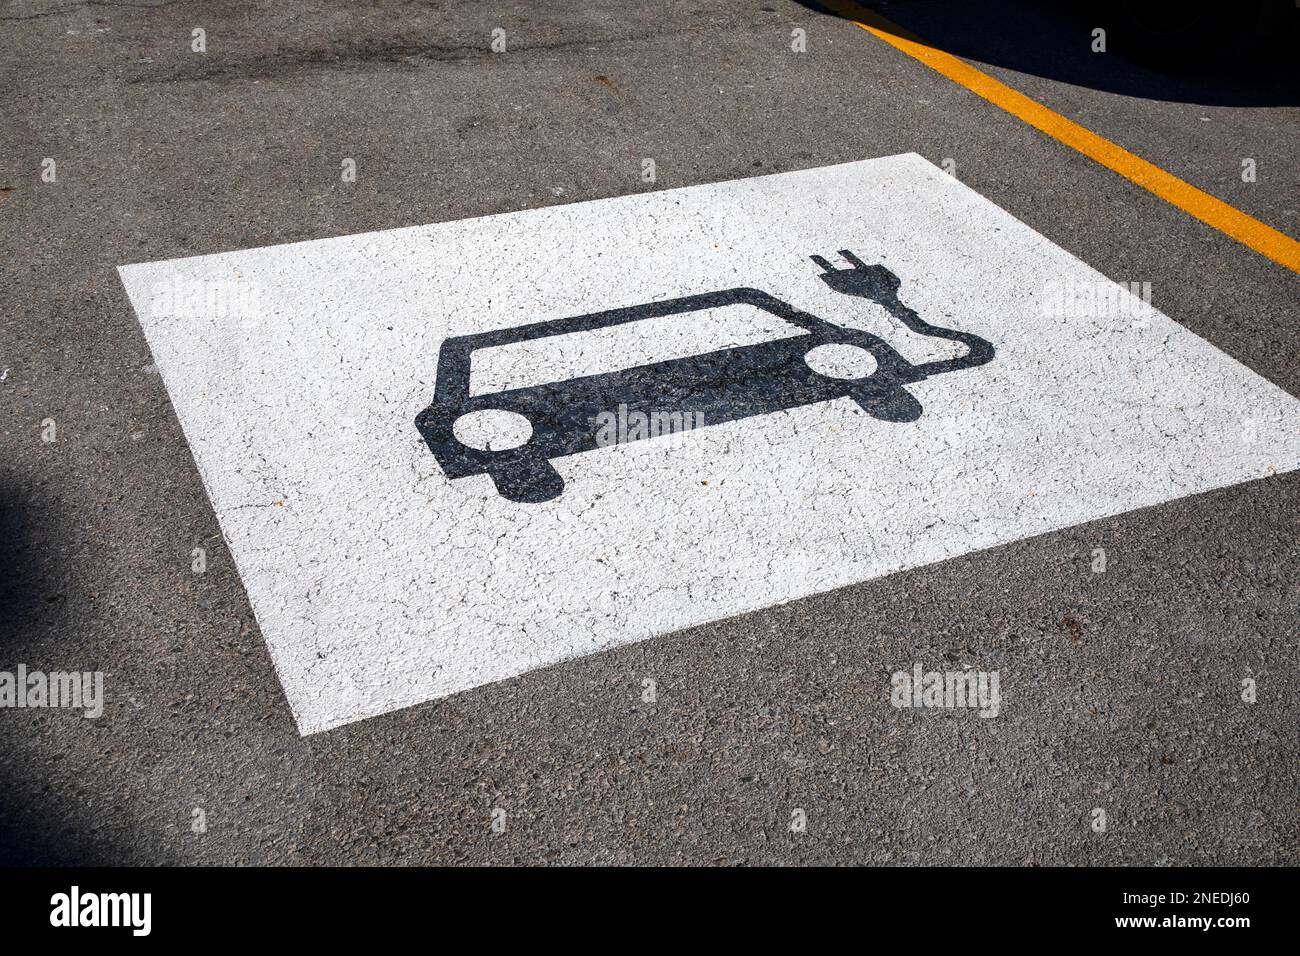 Electric Vehicle parking spot sign on pavement. Stock Photo